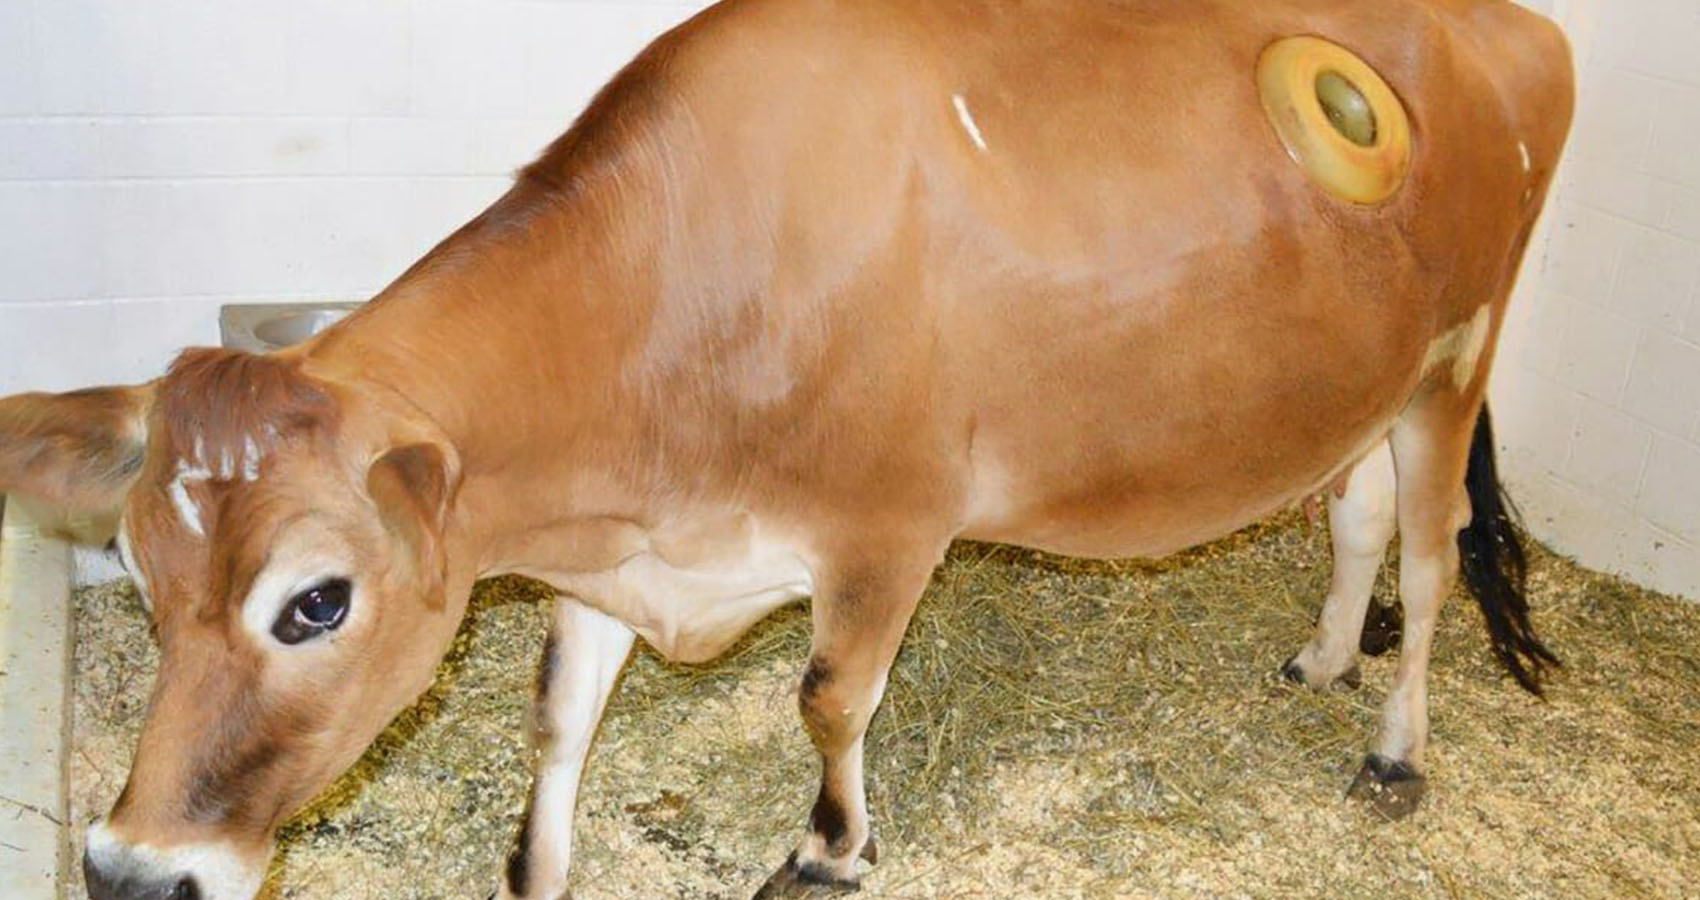 urban legends that turned out to be true - cow fistula